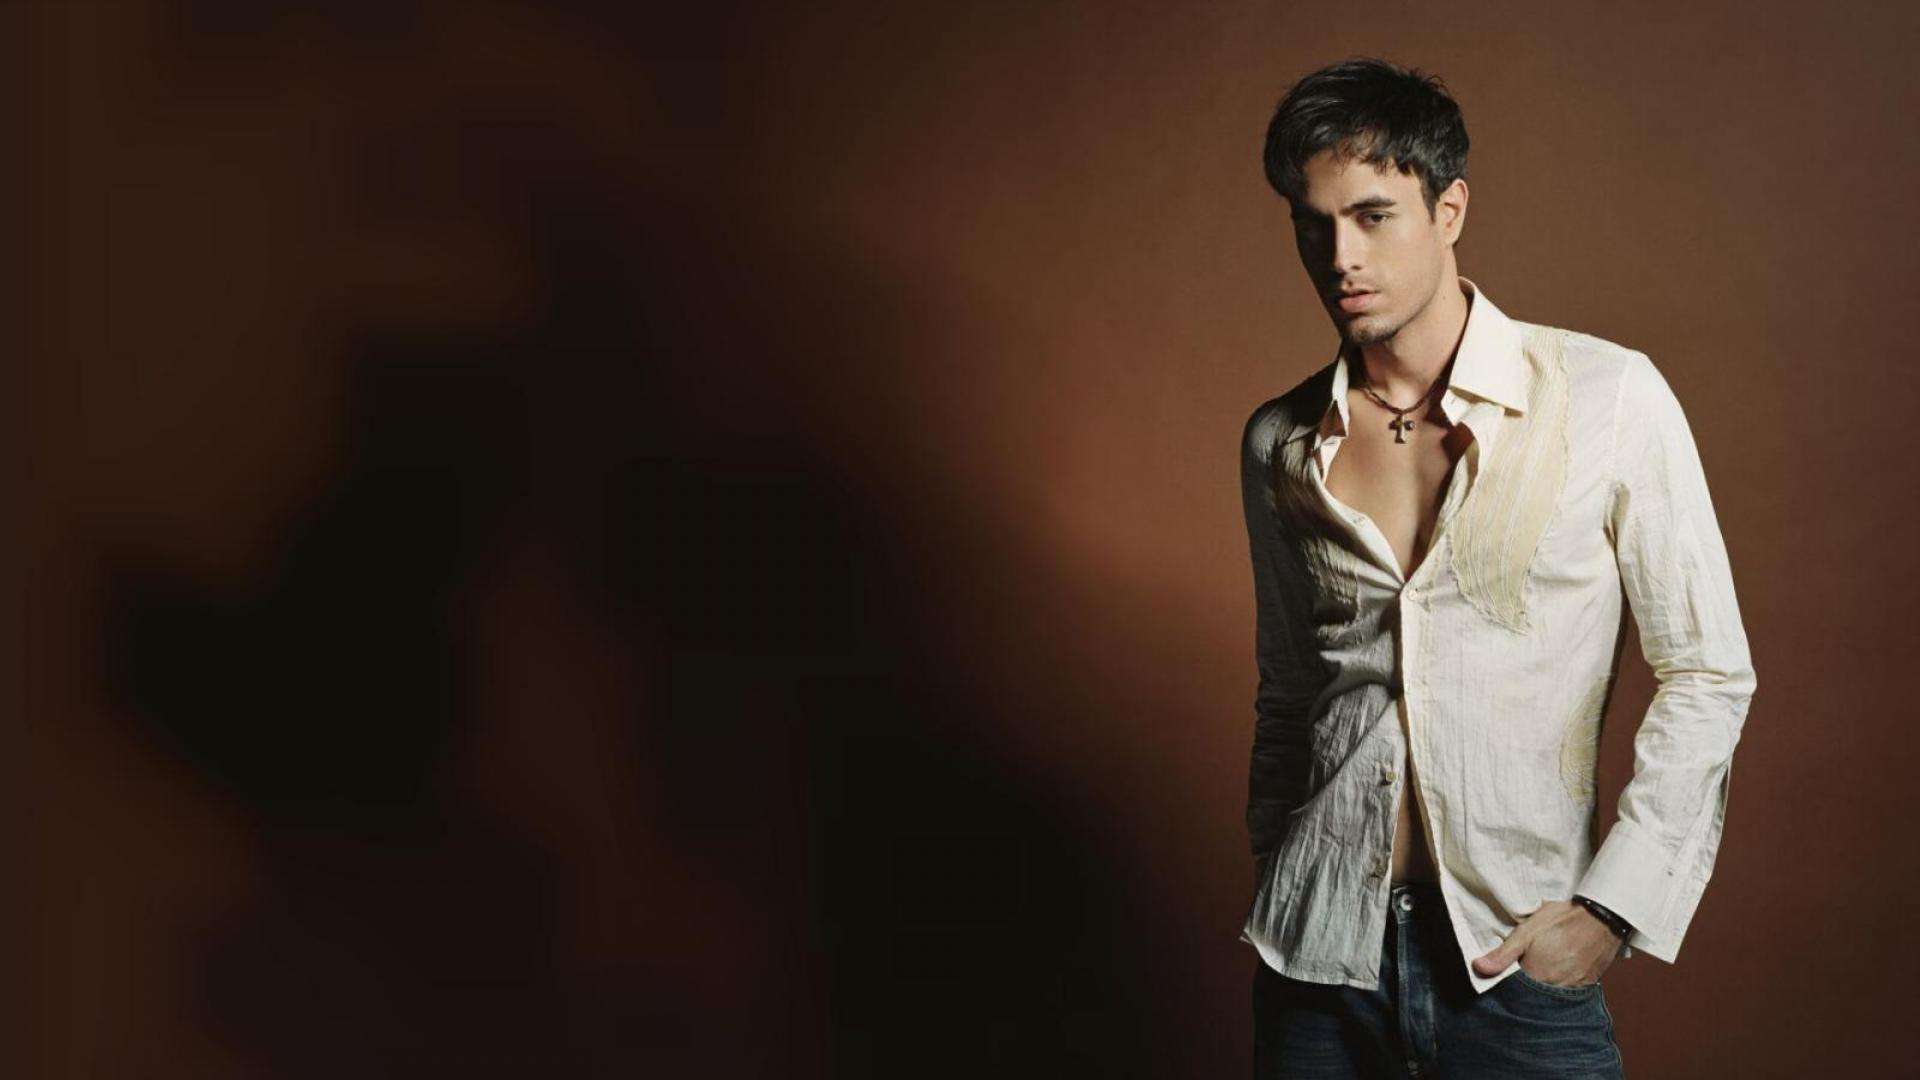 Wallpapers Enrique Iglesias Wallpapers.